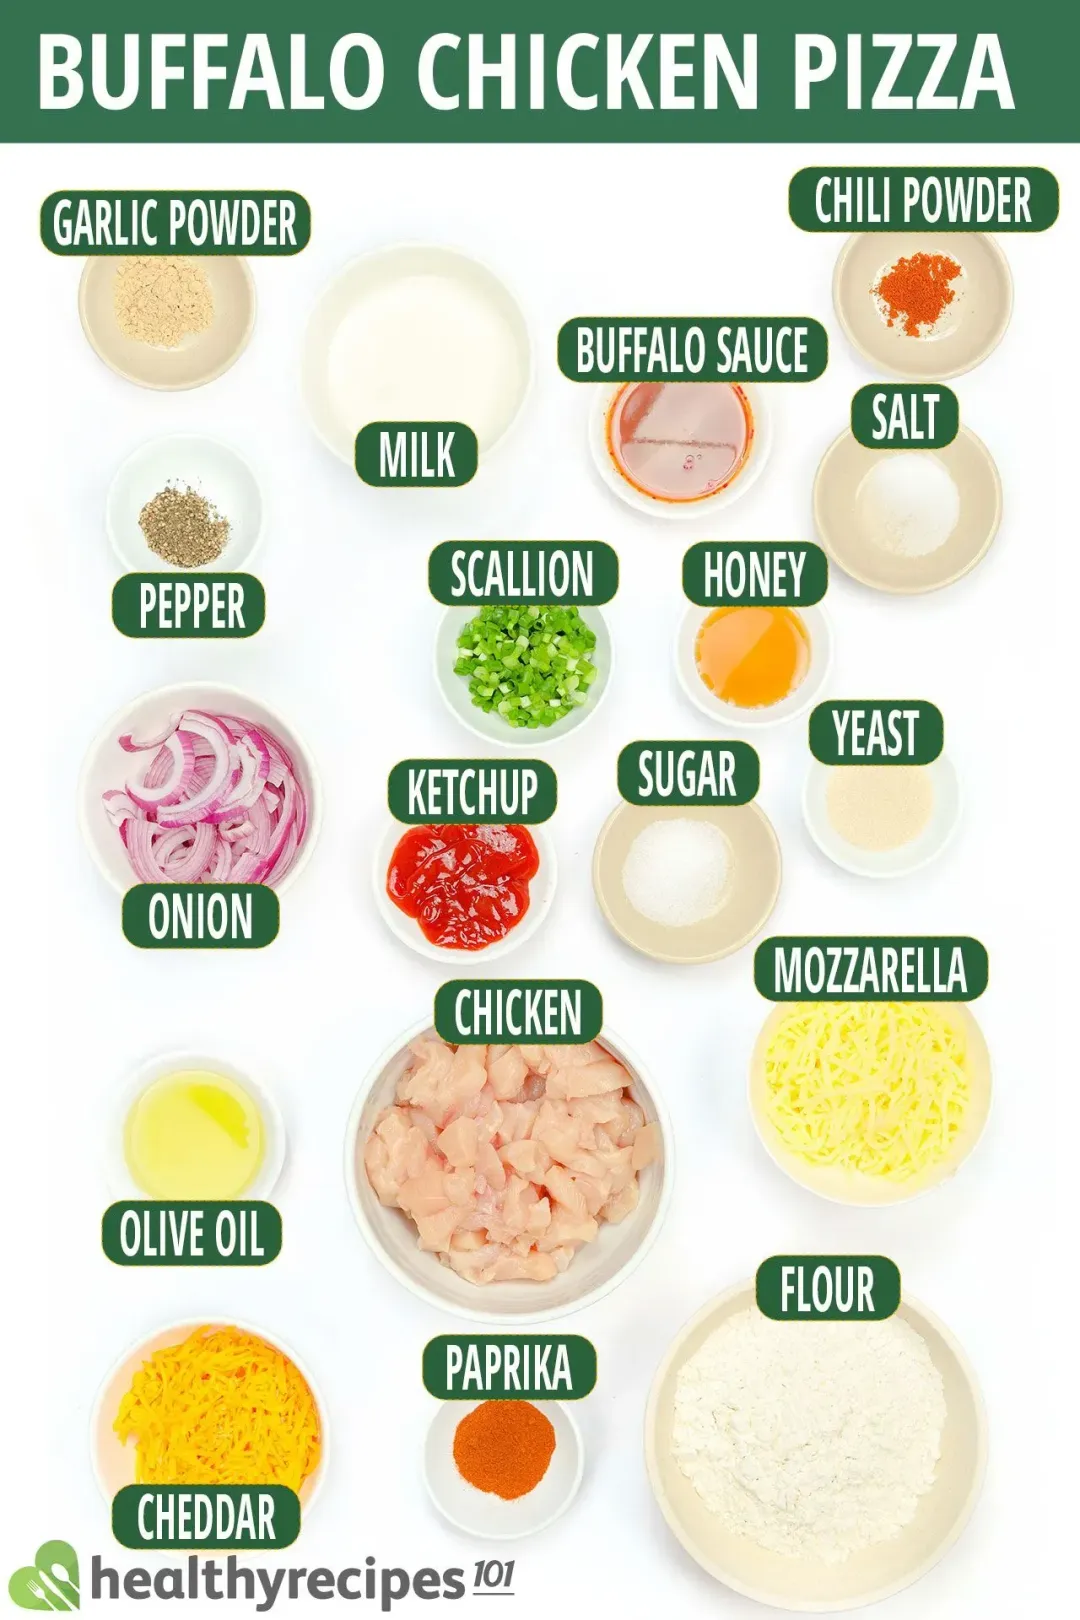 Ingredients for Buffalo Chicken Pizza